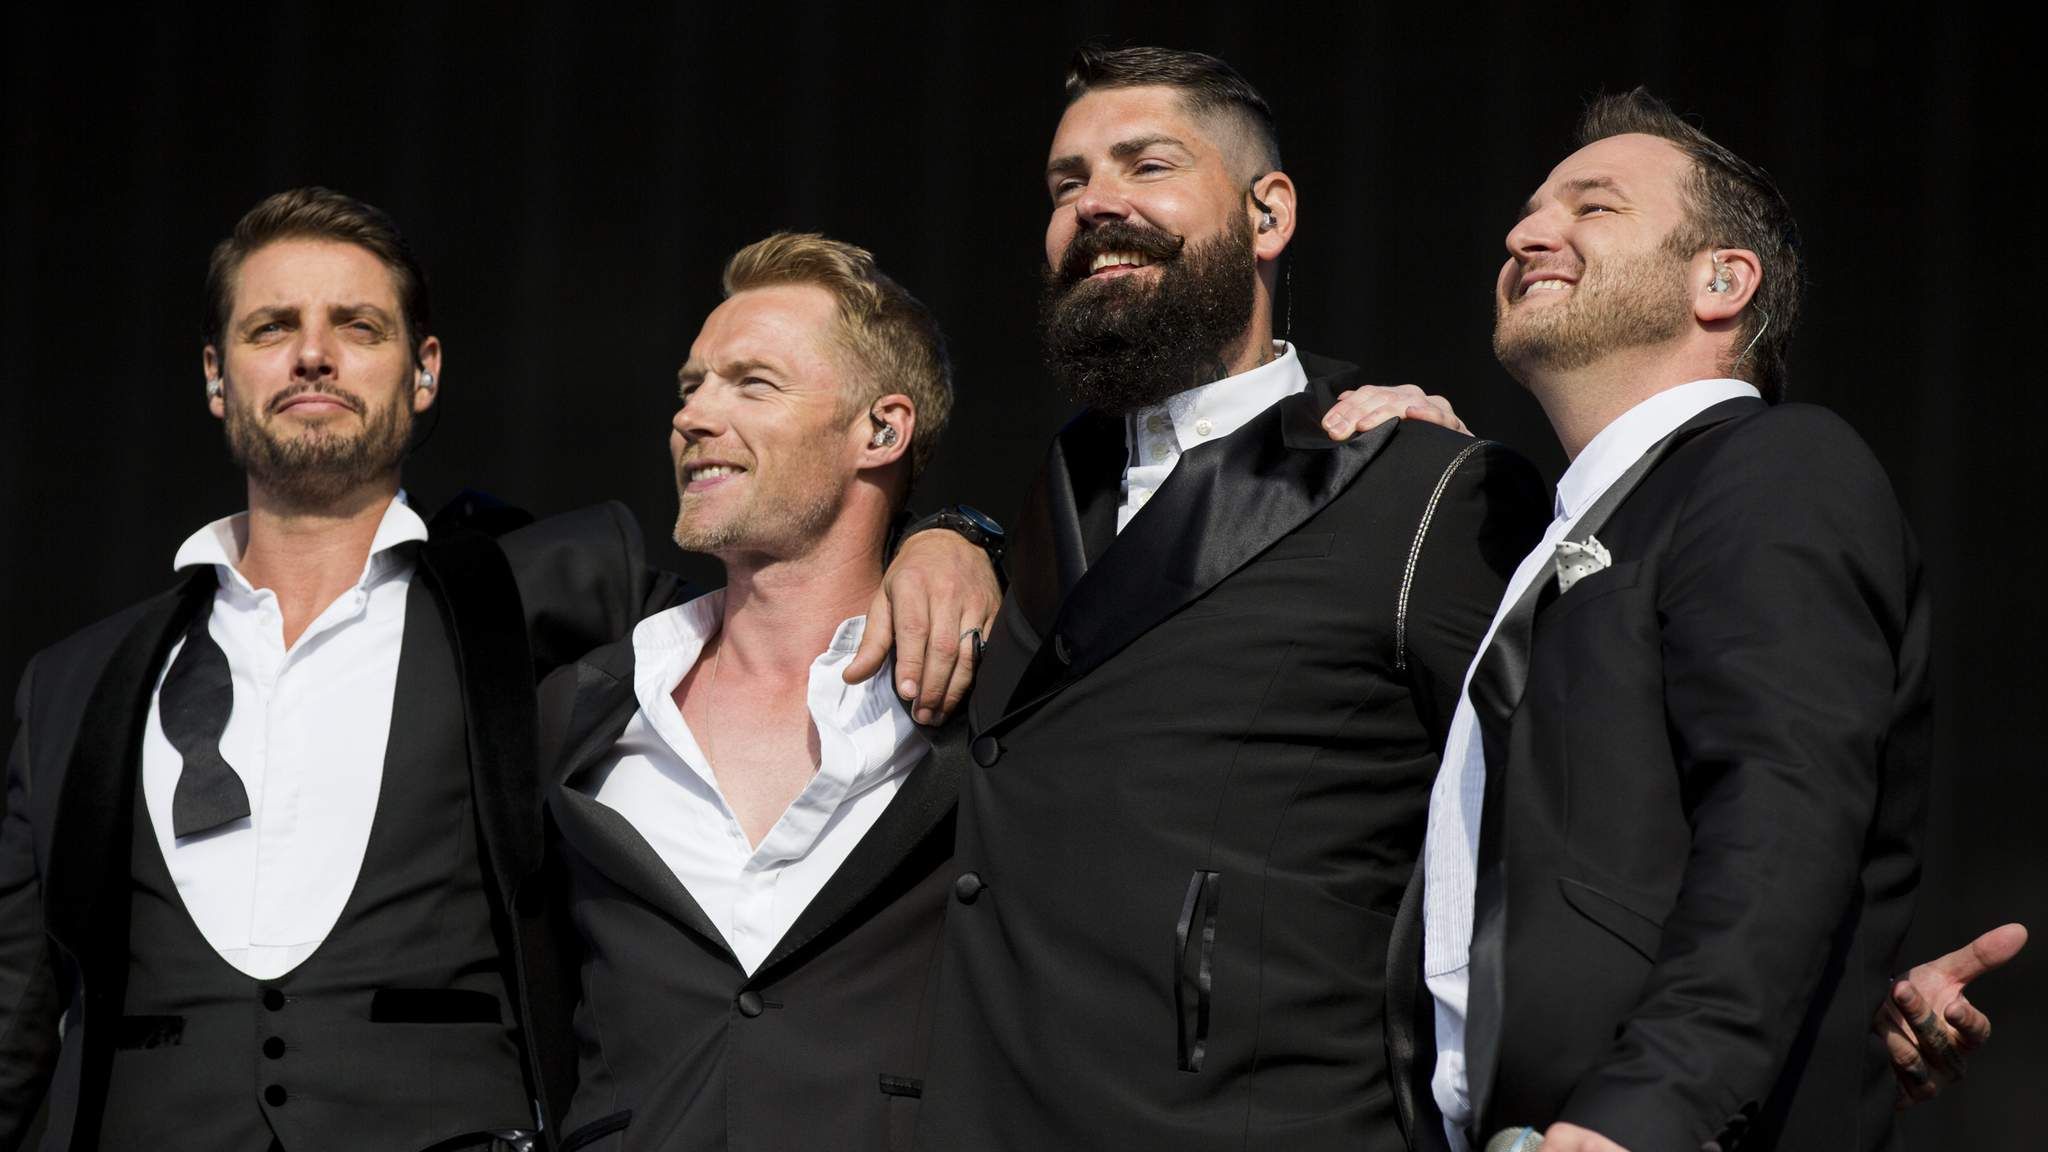 Boyzone to split after final album and farewell tour | Ents Arts News | Sky News